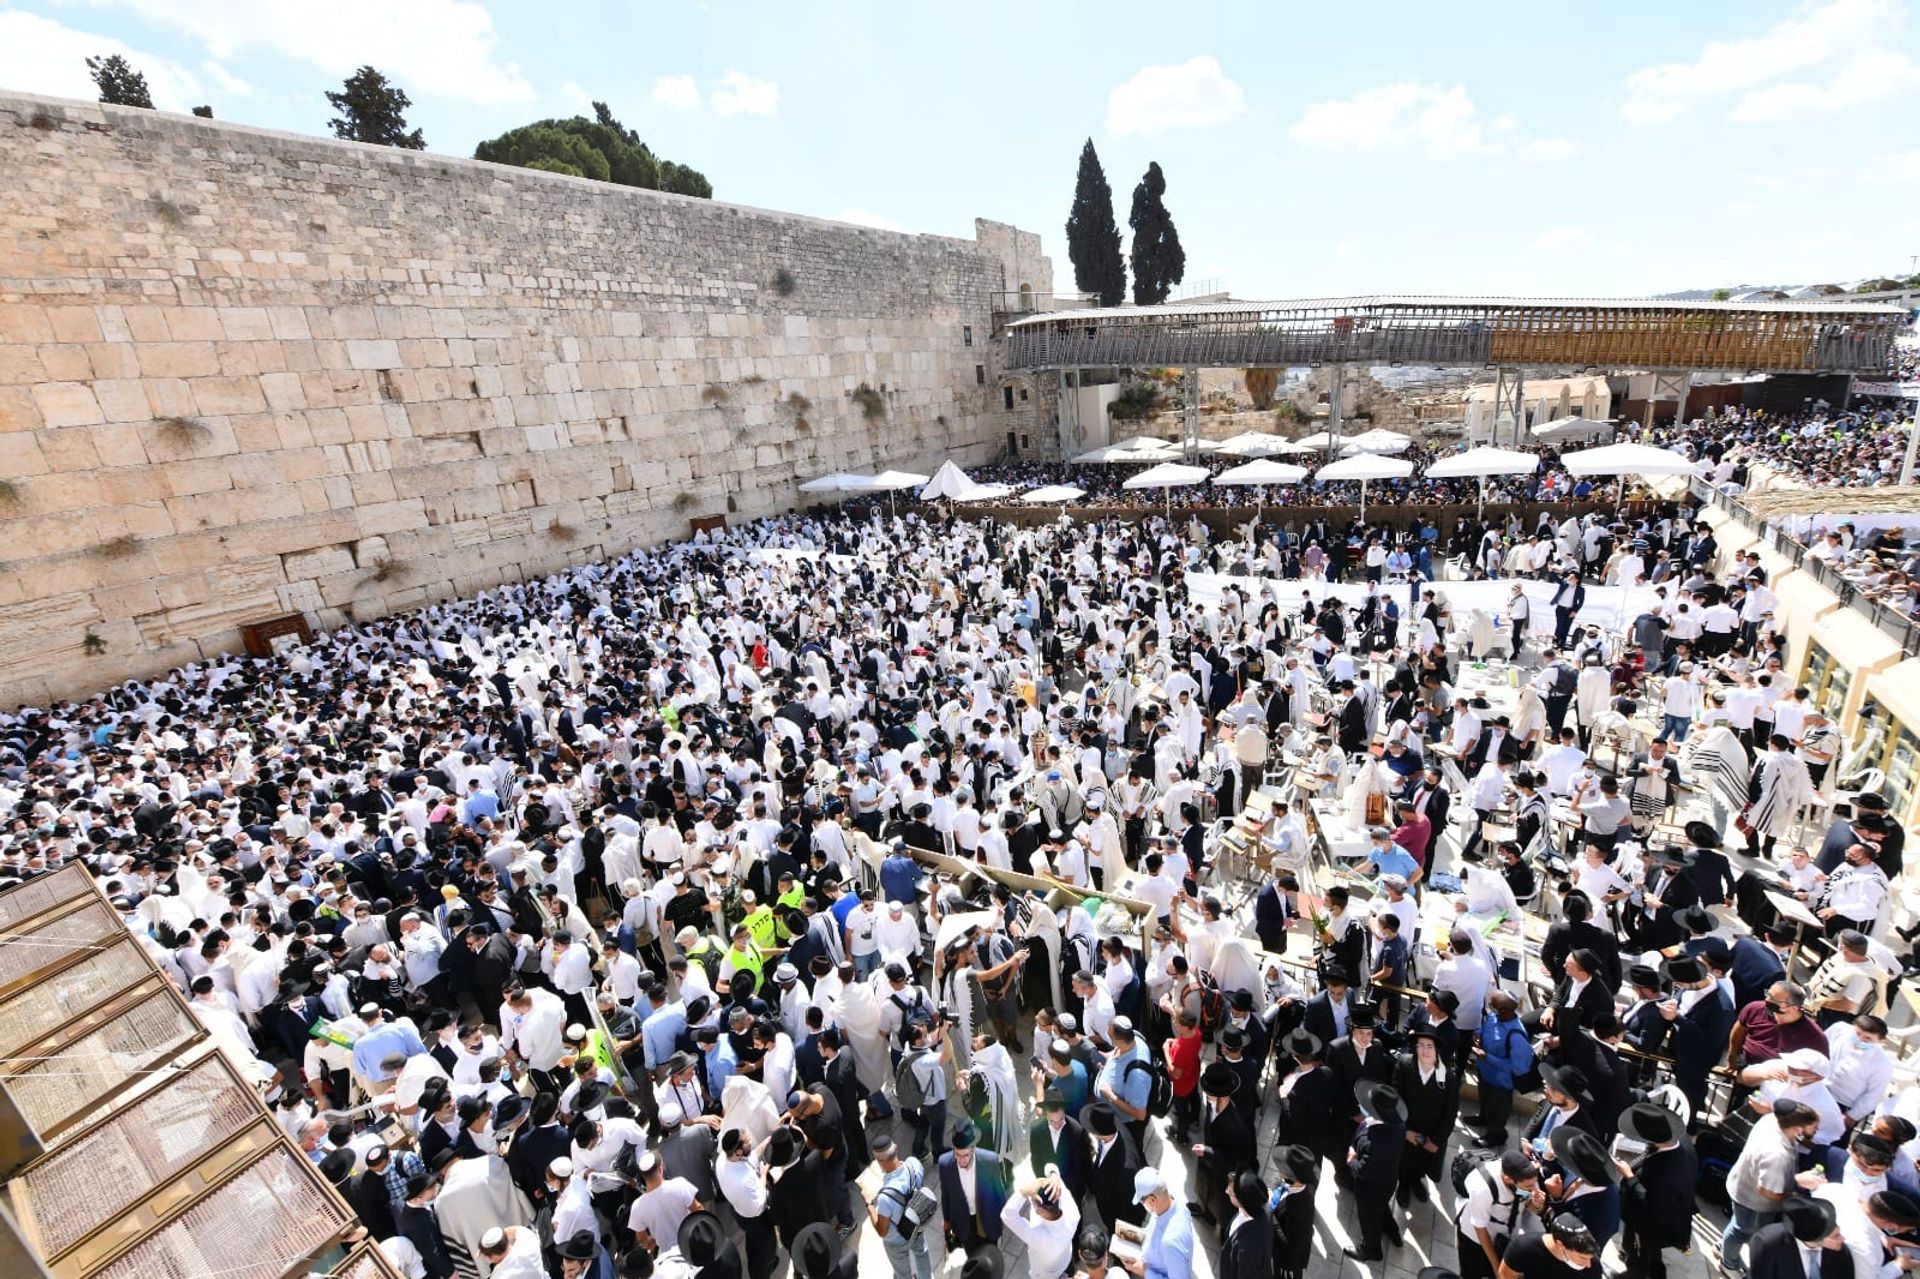 The Western Wall in Ancient Jerusalem is subject to a controversial Israeli development plan. Courtesy of The Western Wall Heritage Foundation 